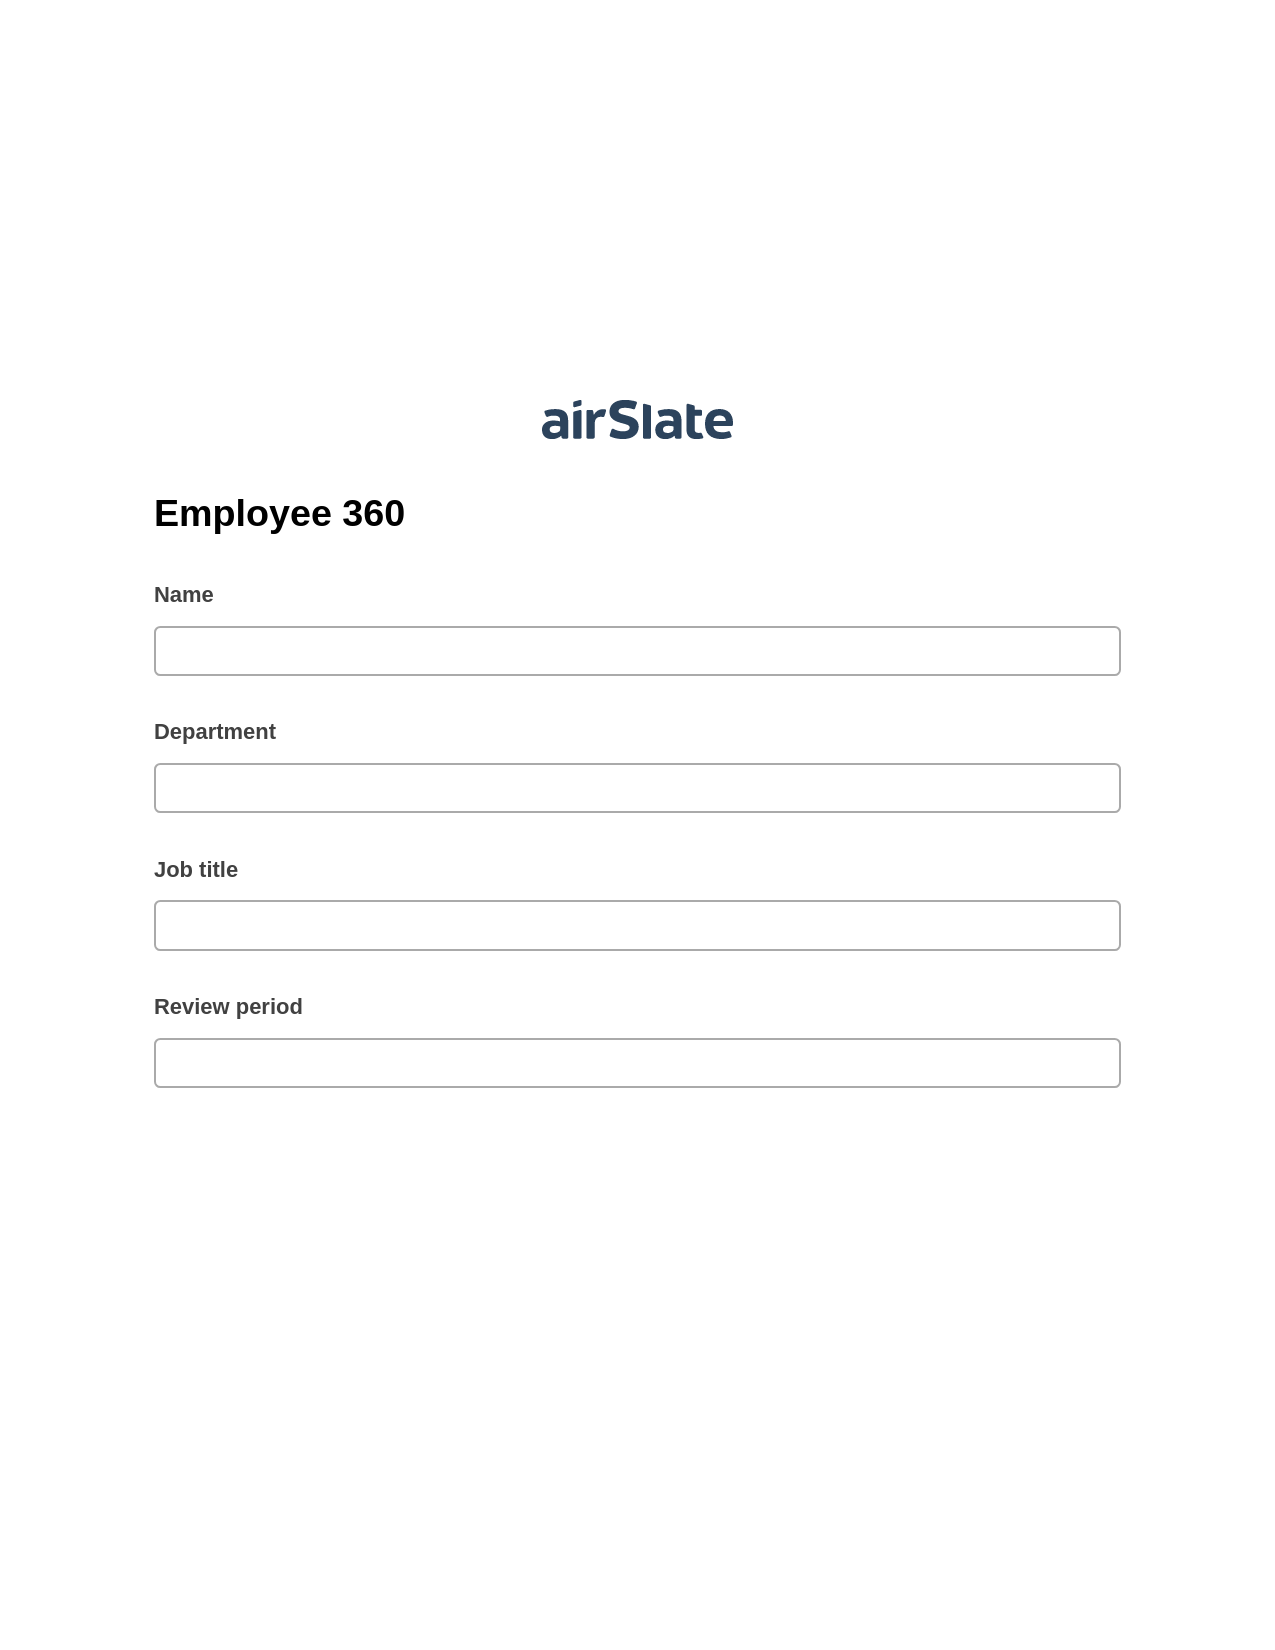 Employee 360 Pre-fill from MS Dynamics 365 Records, Google Calendar Bot, Export to Excel 365 Bot